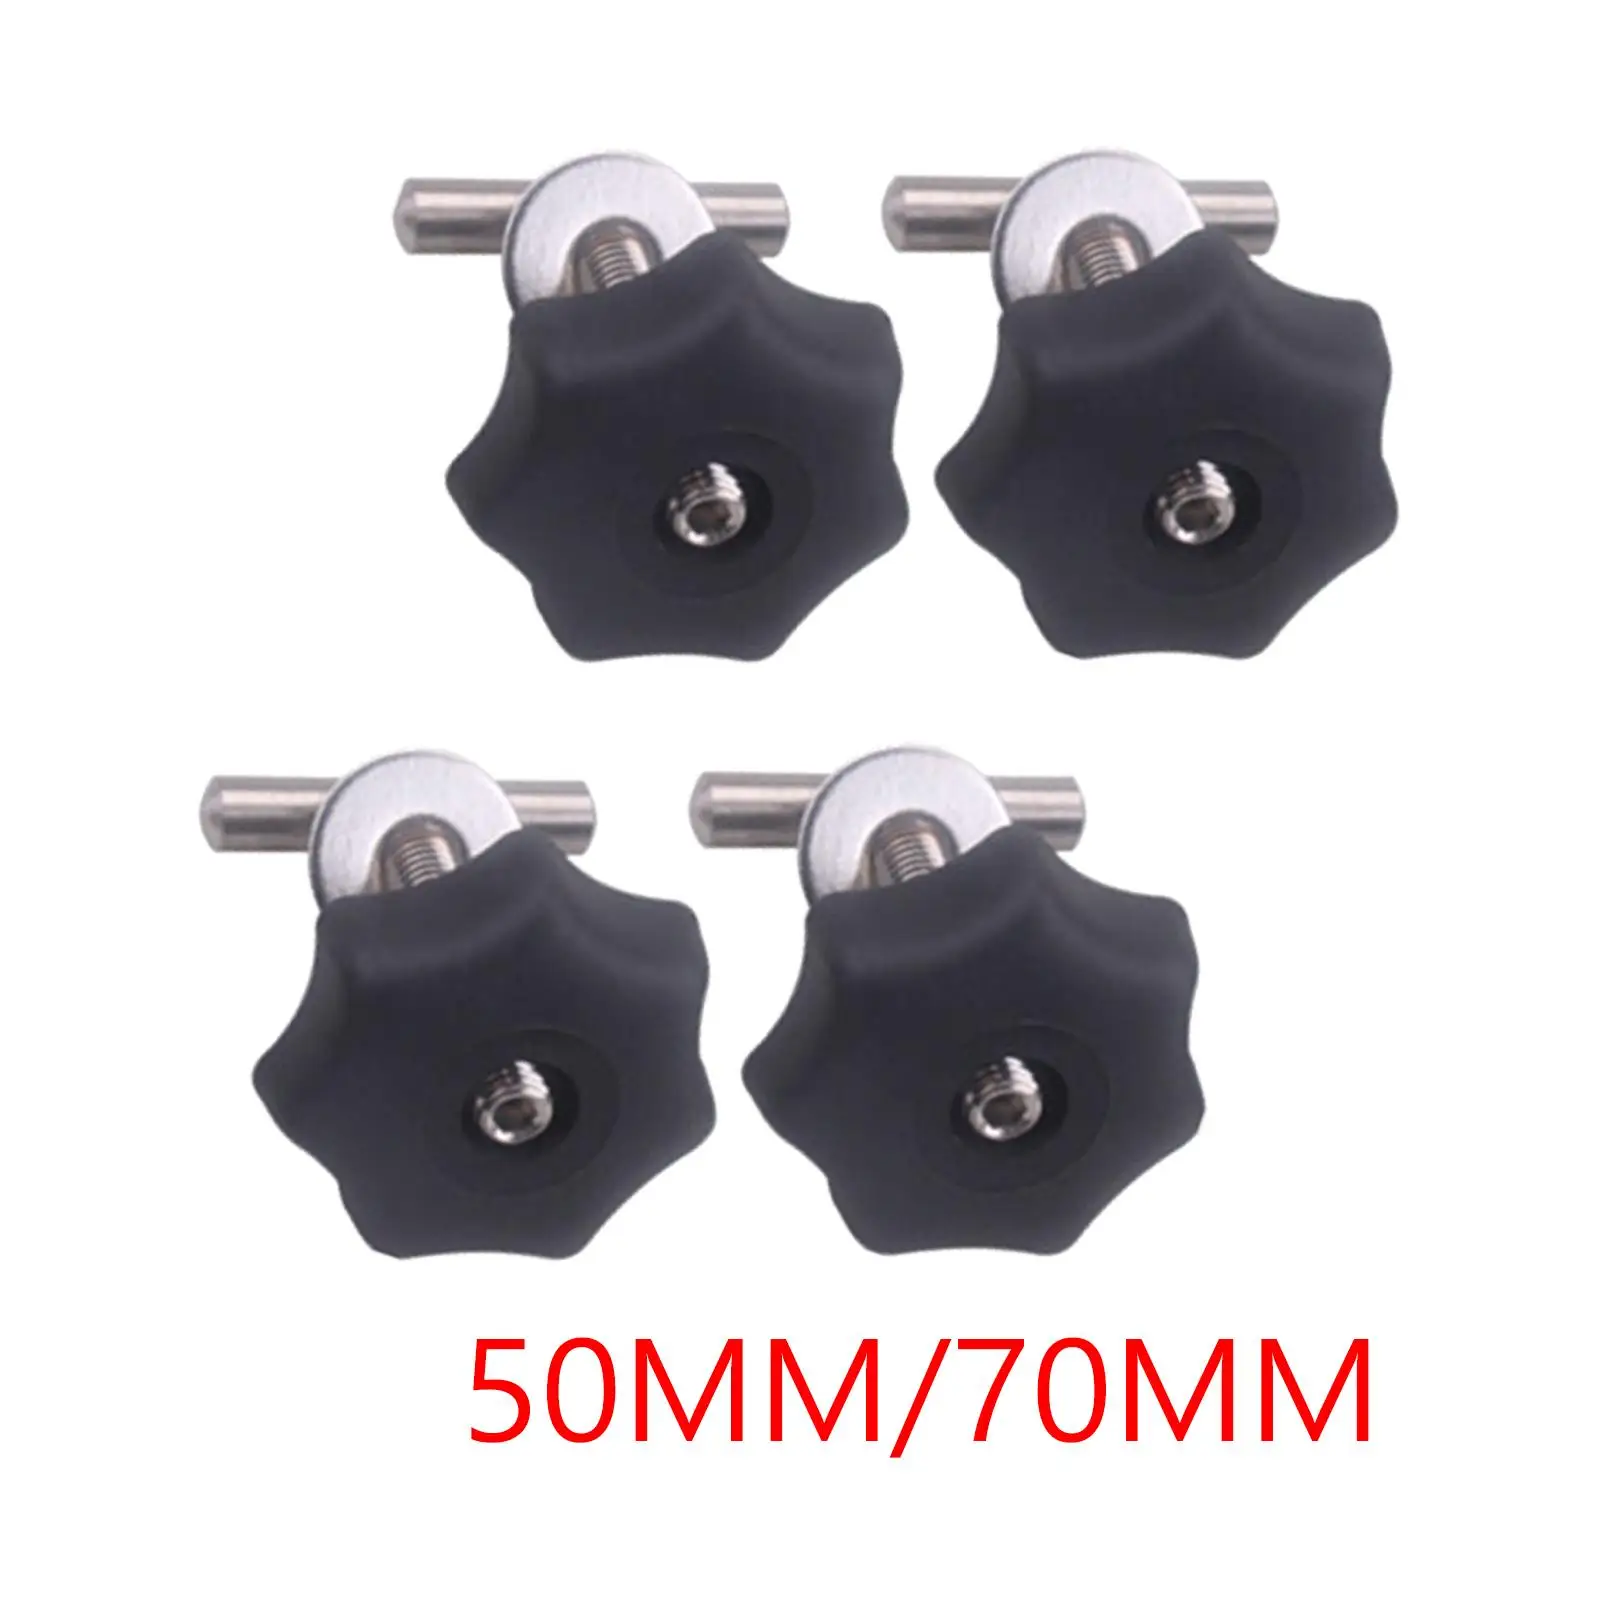 4Pcs Locking Rail Screws Bolt Set Mounting Accessories Stainless Steel Stable Fixing Screws set for T5 Multiflexboard